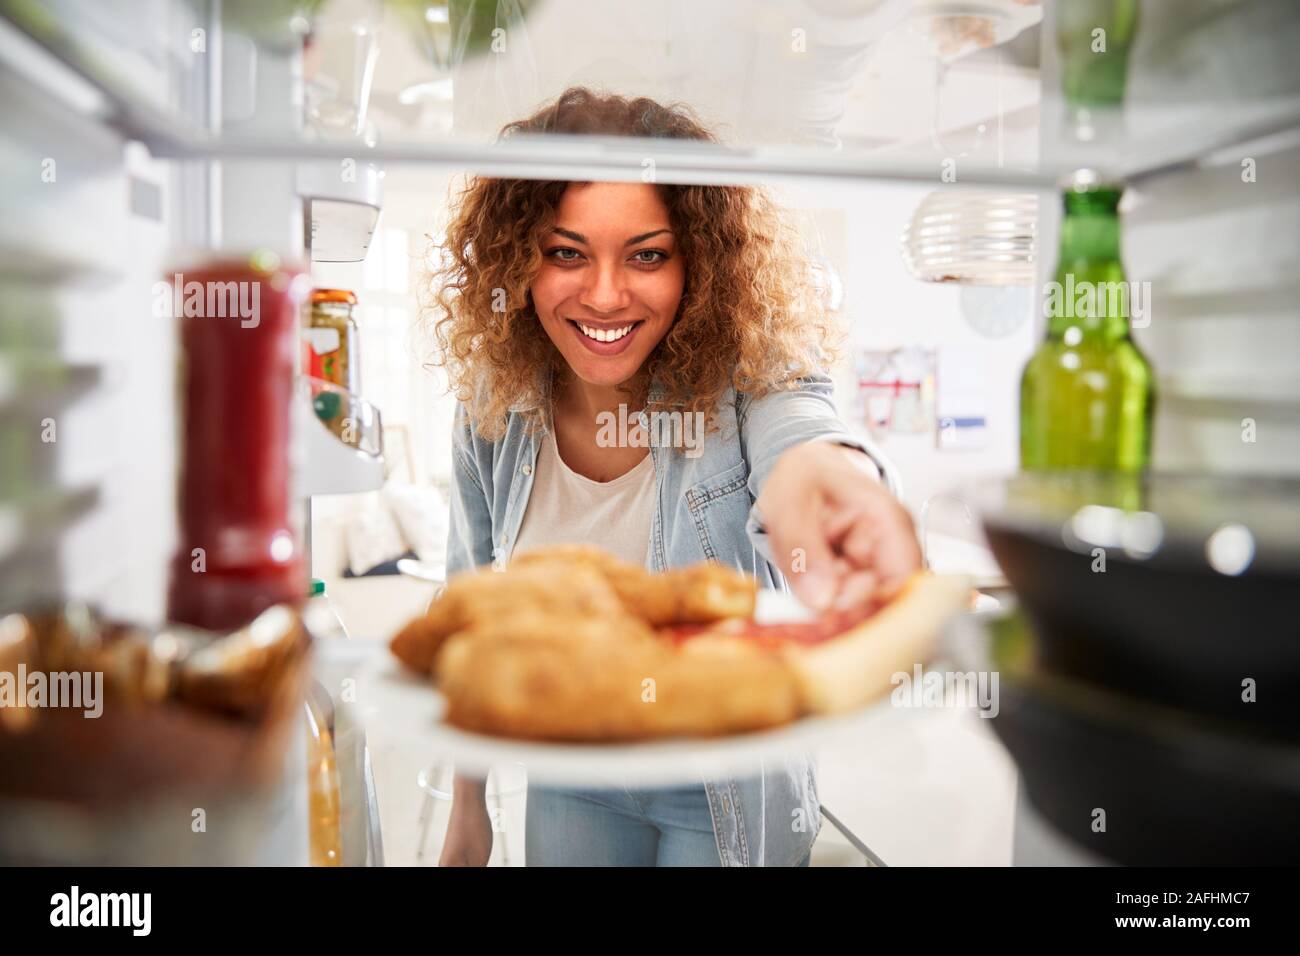 View Looking Out From Inside Of Refrigerator Filled With Takeaway Food As Woman Opens Door Stock Photo